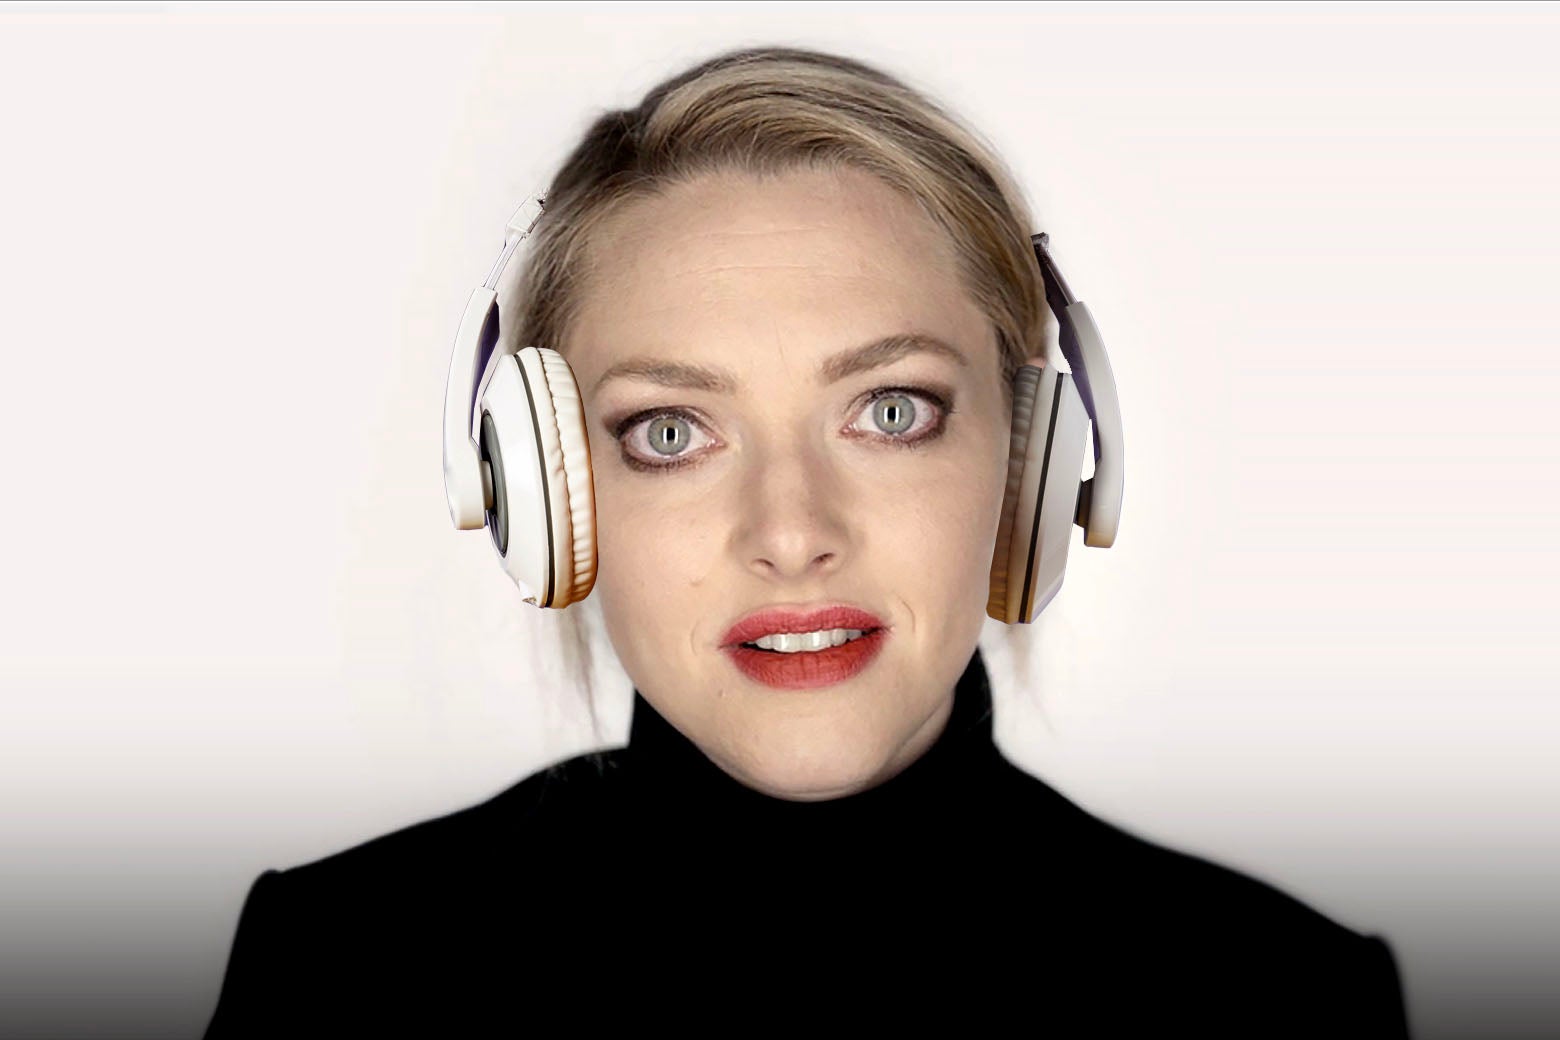 Amanda Seyfried as Elizabeth Holmes, staring directly into the camera in her signature black turtleneck, her eyes glassy, a pair of Beats headphones photoshopped onto her head